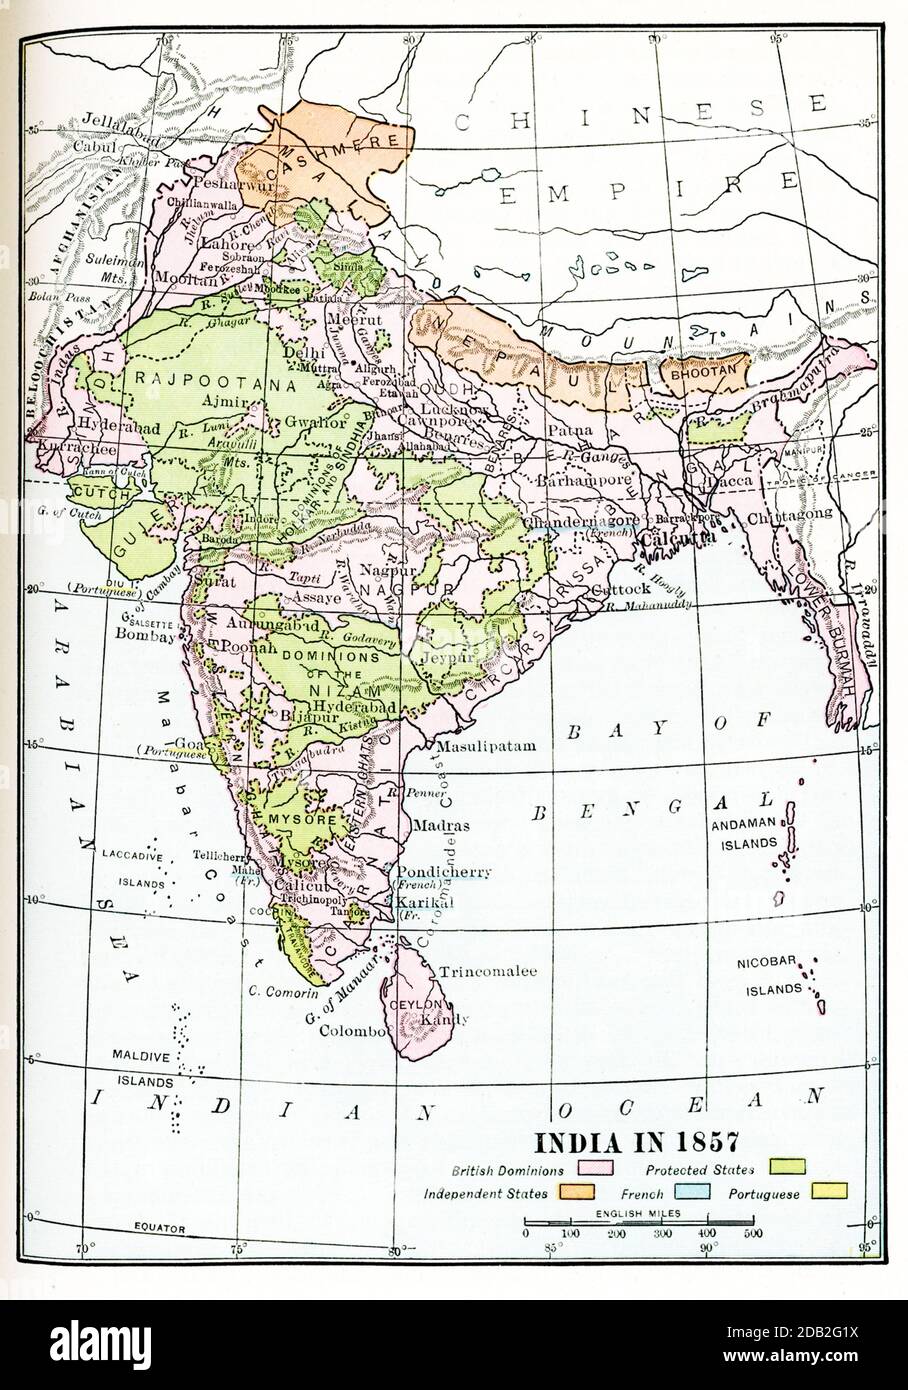 India in 1857.  British dominions are in pink. Protected states in yellow. Independent states in orange. French in blue, Portuguese in yellow. Stock Photo